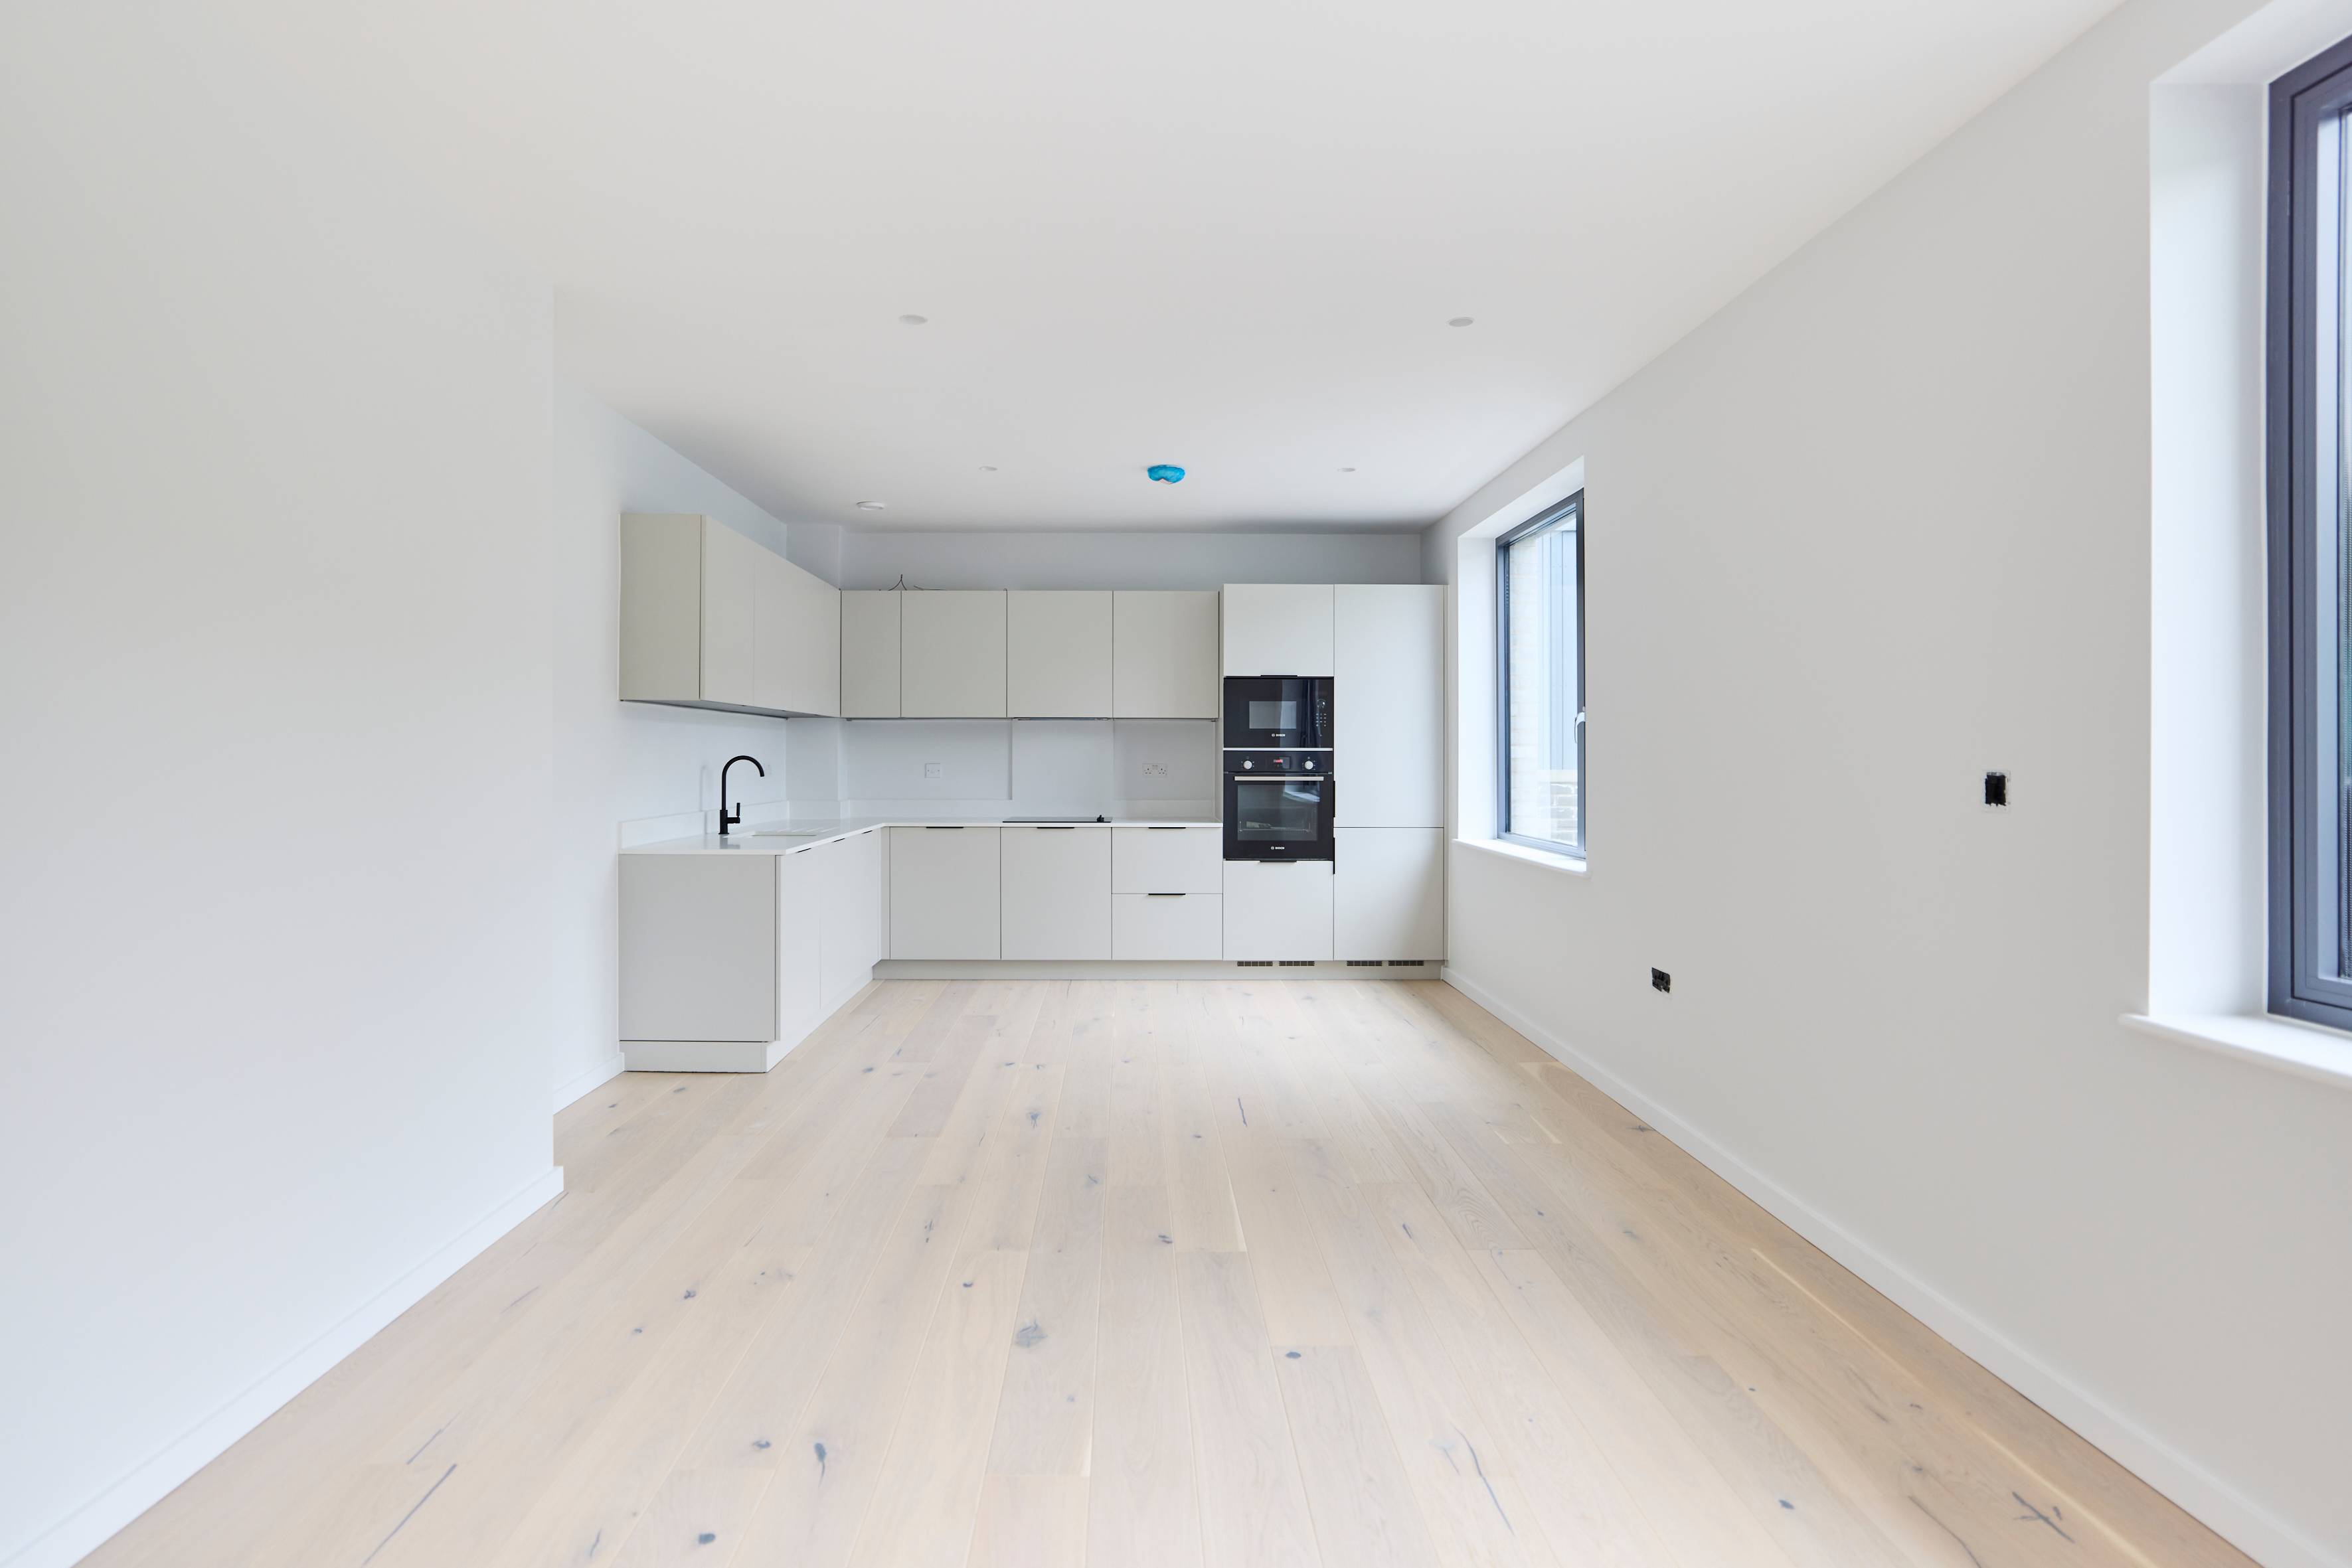 Brand-New Contemporary Two-Bedroom Apartment with Large Private Balcony in Familiy-Friendly Kilburn